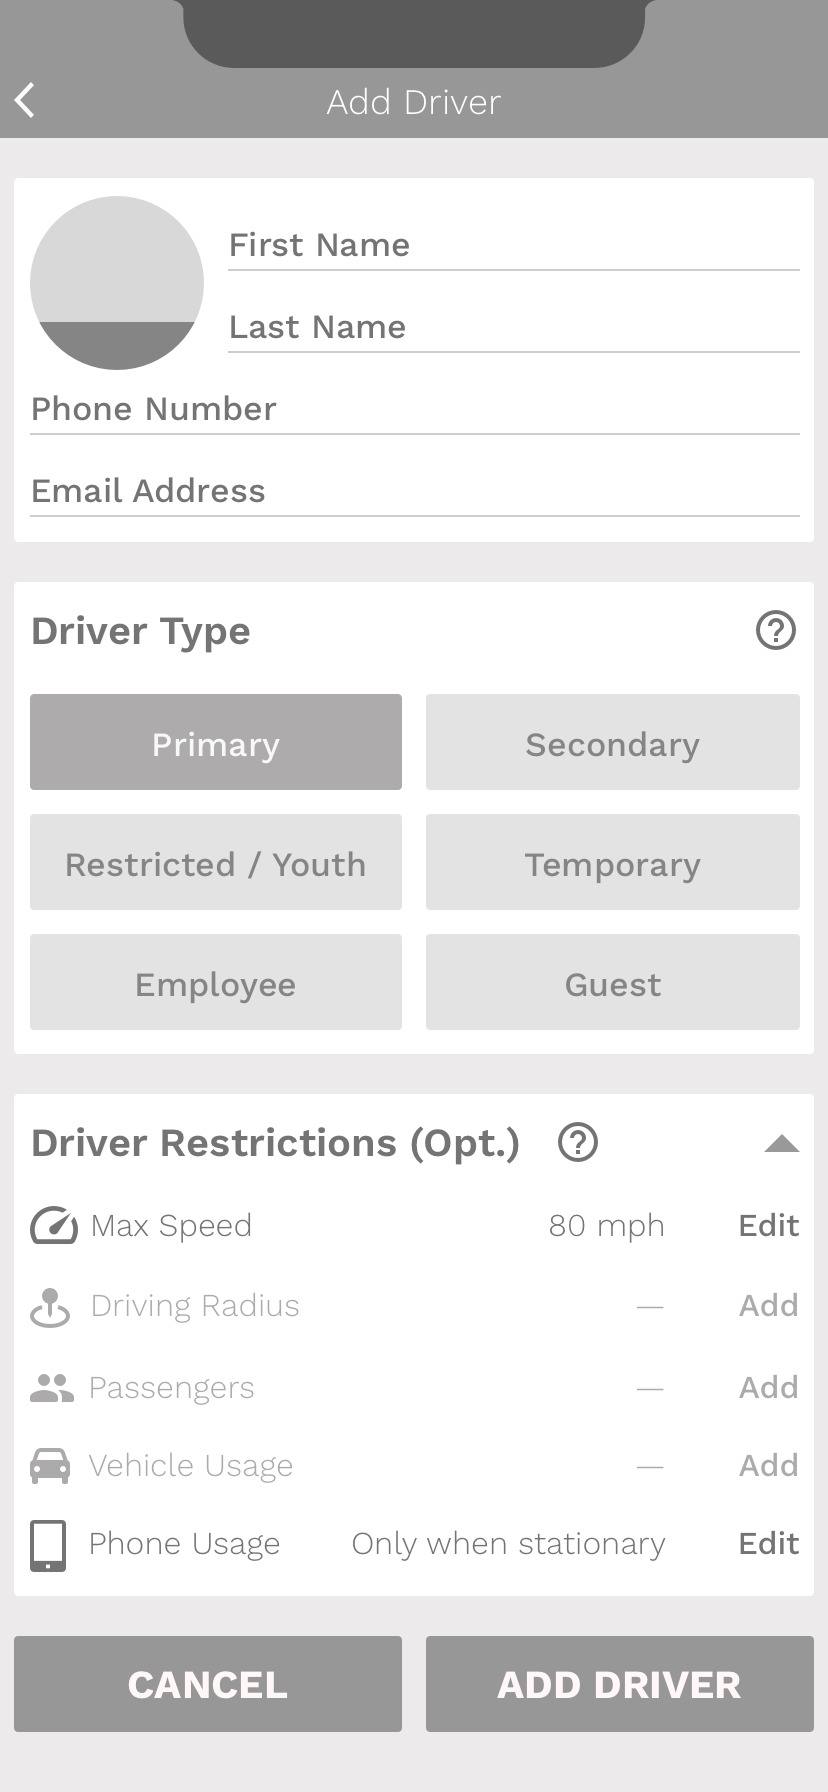 Add-Driver-Wireframe-Restrictions-Dropdown-v1